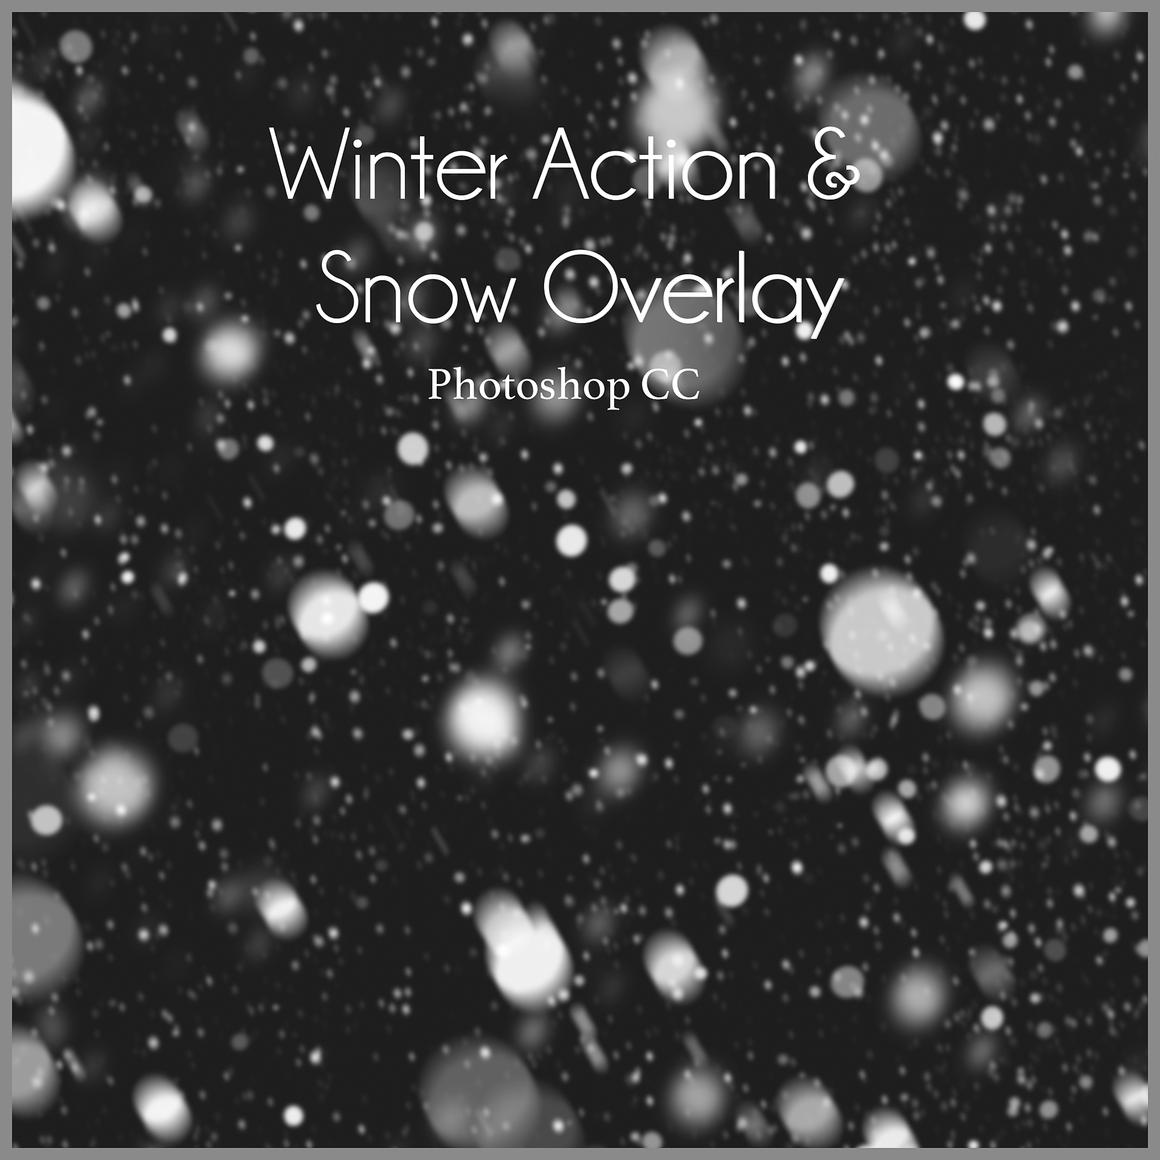 WINTER - Let it Snow - Action Set and Overlay - Dream Artsy Actions Tutorials